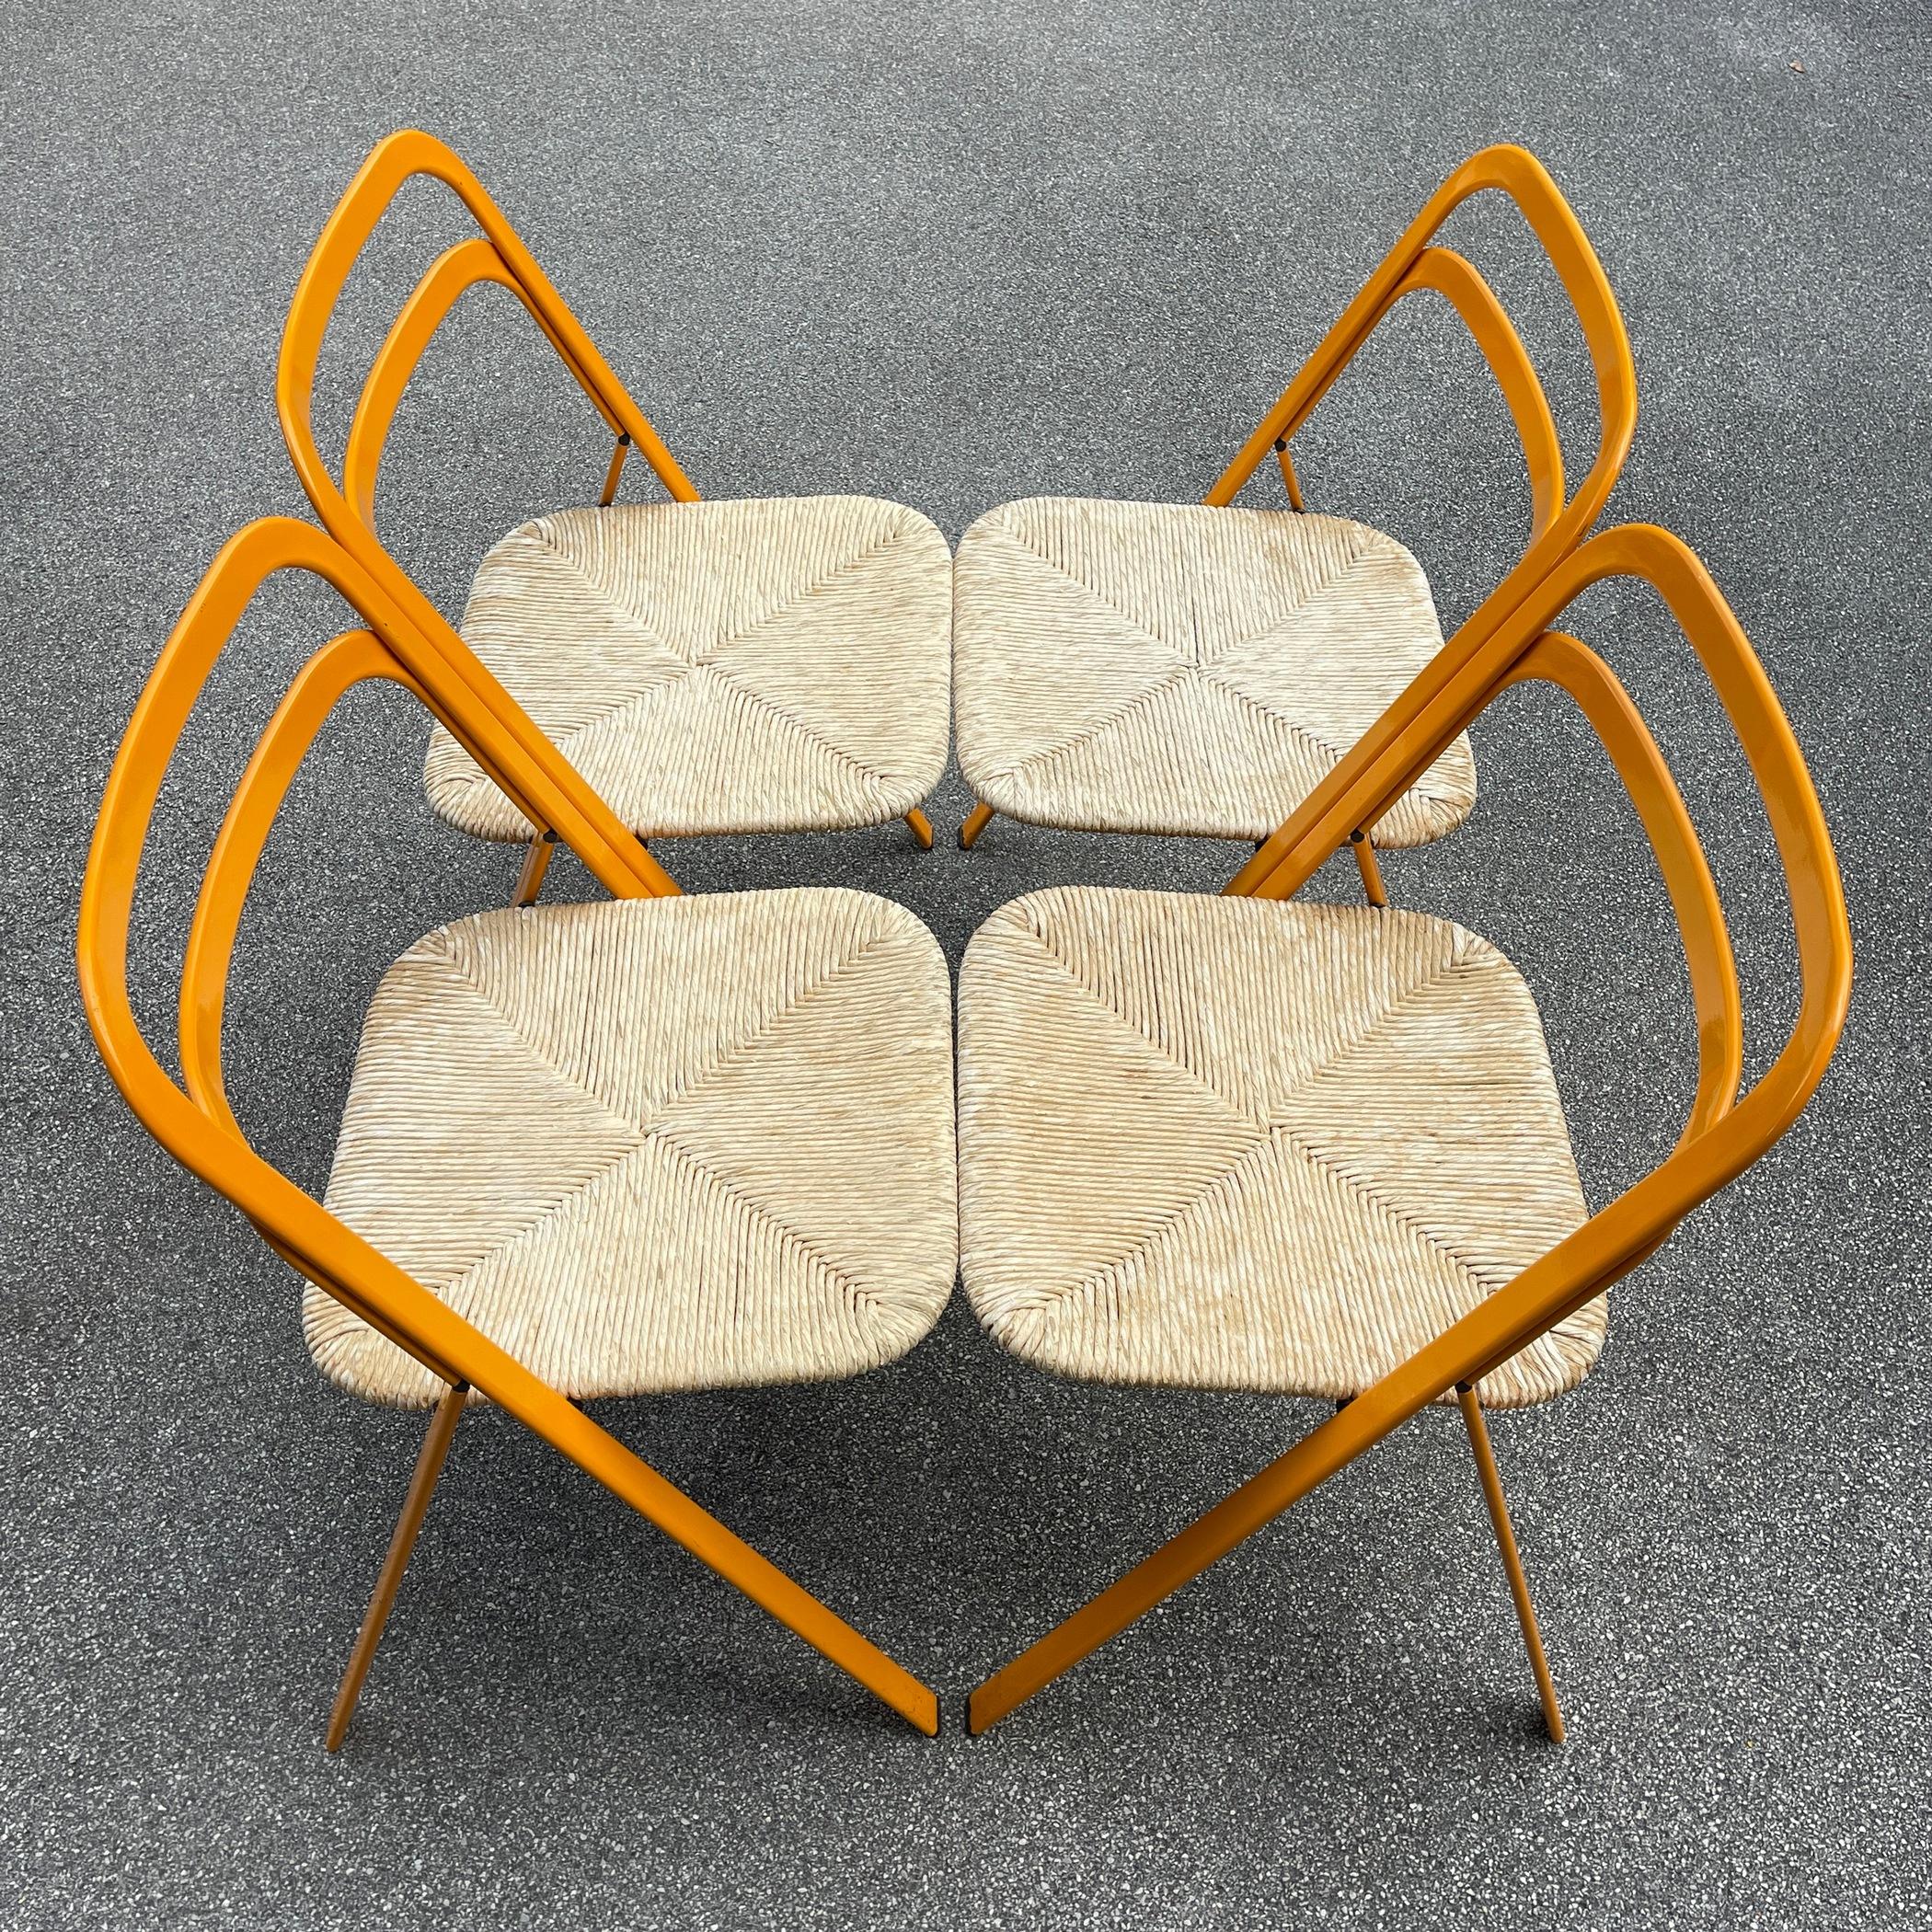 Mid-Century Modern Set of 4 Italian Folding Chairs by Giorgio Cattelan for Cidue, 1970s